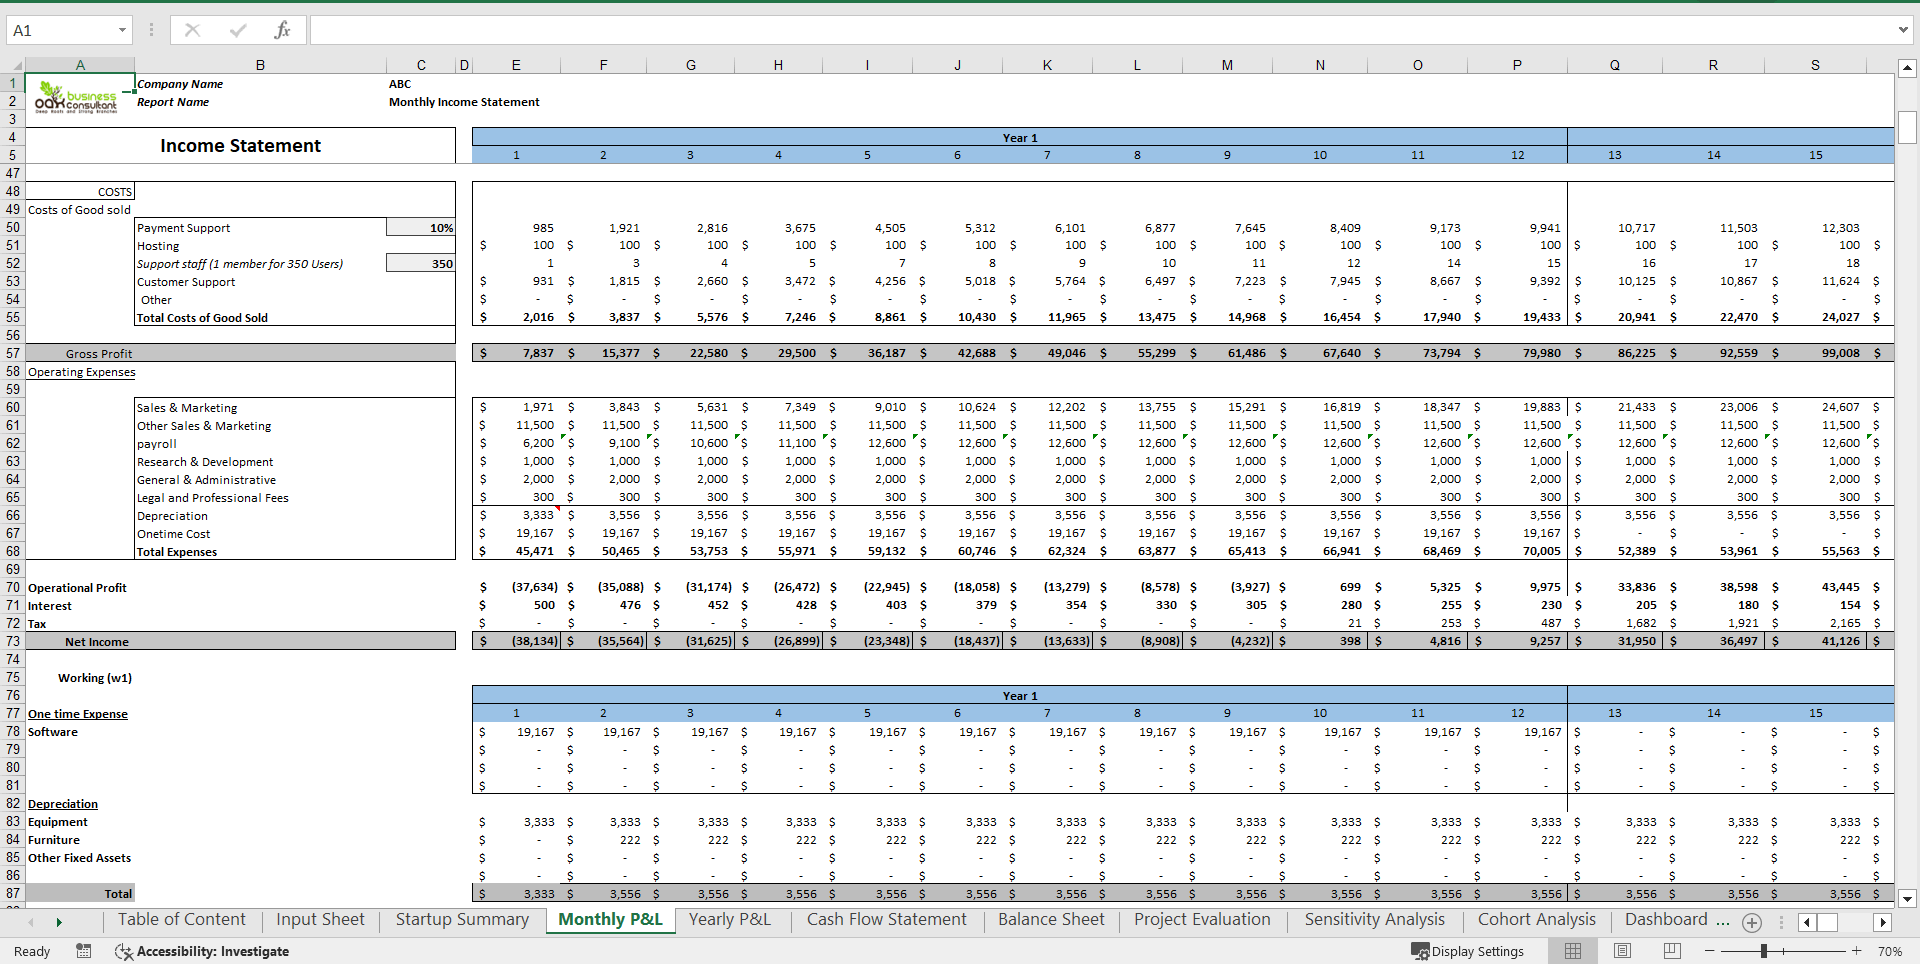 Fintech Financial Model with Cohort Analysis (Excel template (XLSX)) Preview Image